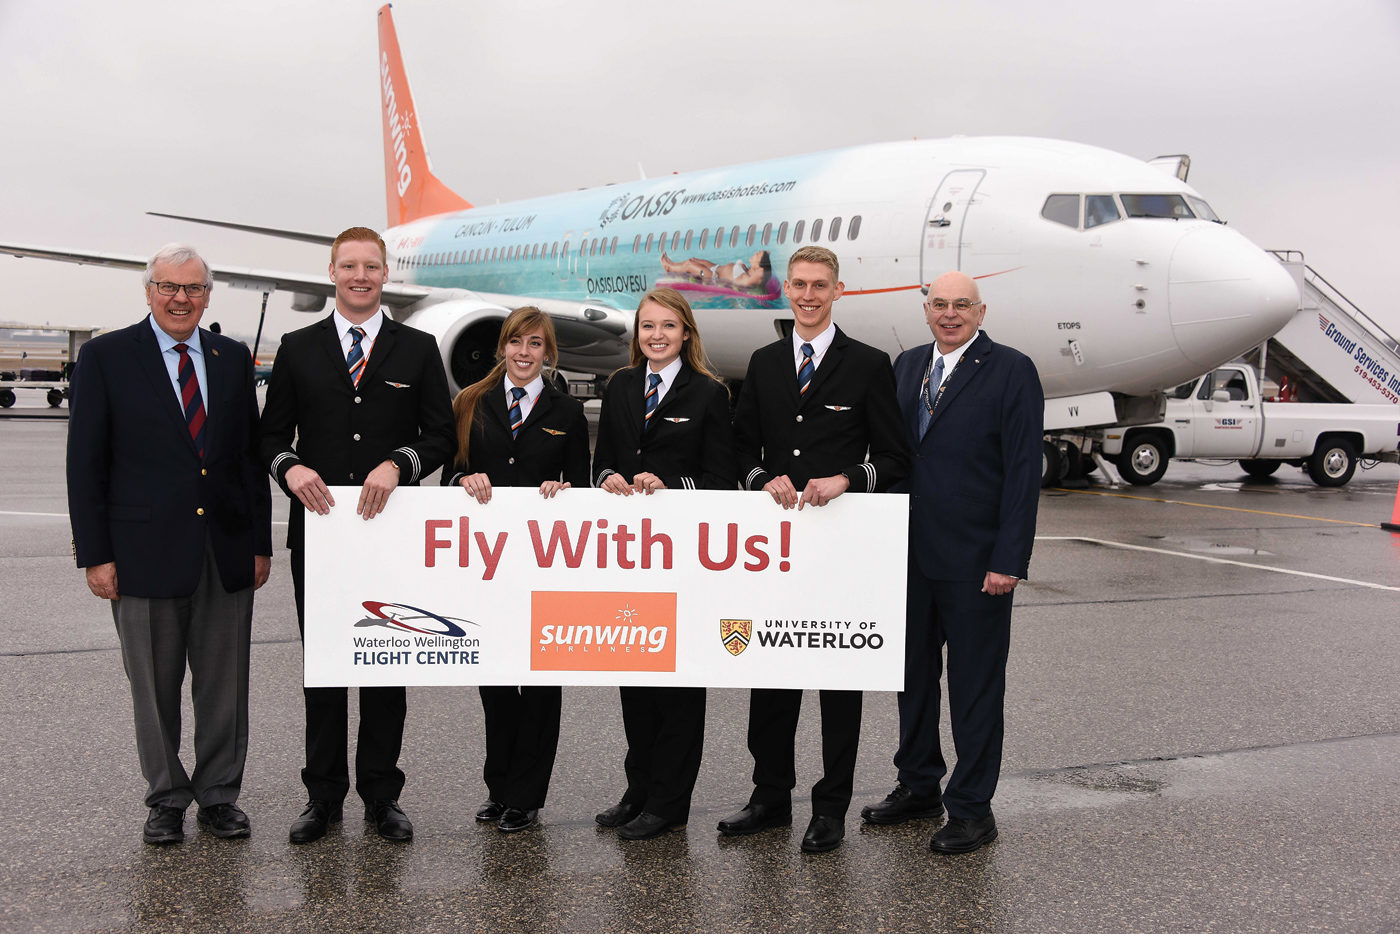 A celebration on the tarmac at the Region of Waterloo International Airport on Feb. 23 included, from left to right, Waterloo Wellington Flight Centre General Manager Bob Connors, newly-minted Sunwing First Officers Cameron Fuchs, Chelsea Anne Edwards, Siobhan O’Hanlon and Spencer Leckie, and Dr. Ian McKenzie, Director of Aviation, Faculties of Science and Environment, University of Waterloo. Mike Reyno Photo